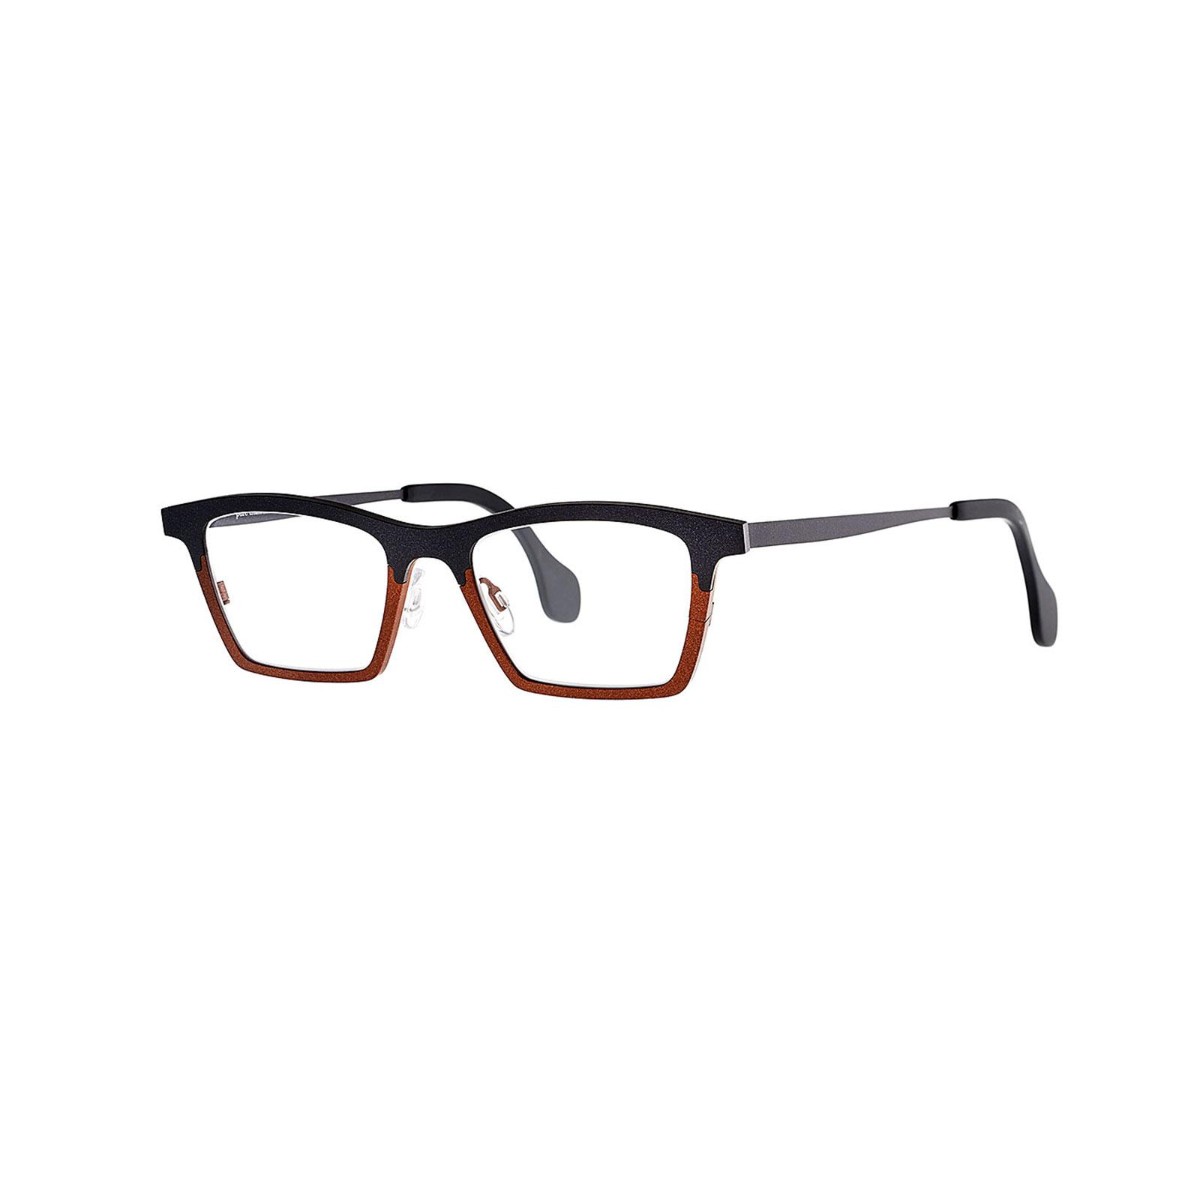 Theo - Mille+58 293 Black/Brown